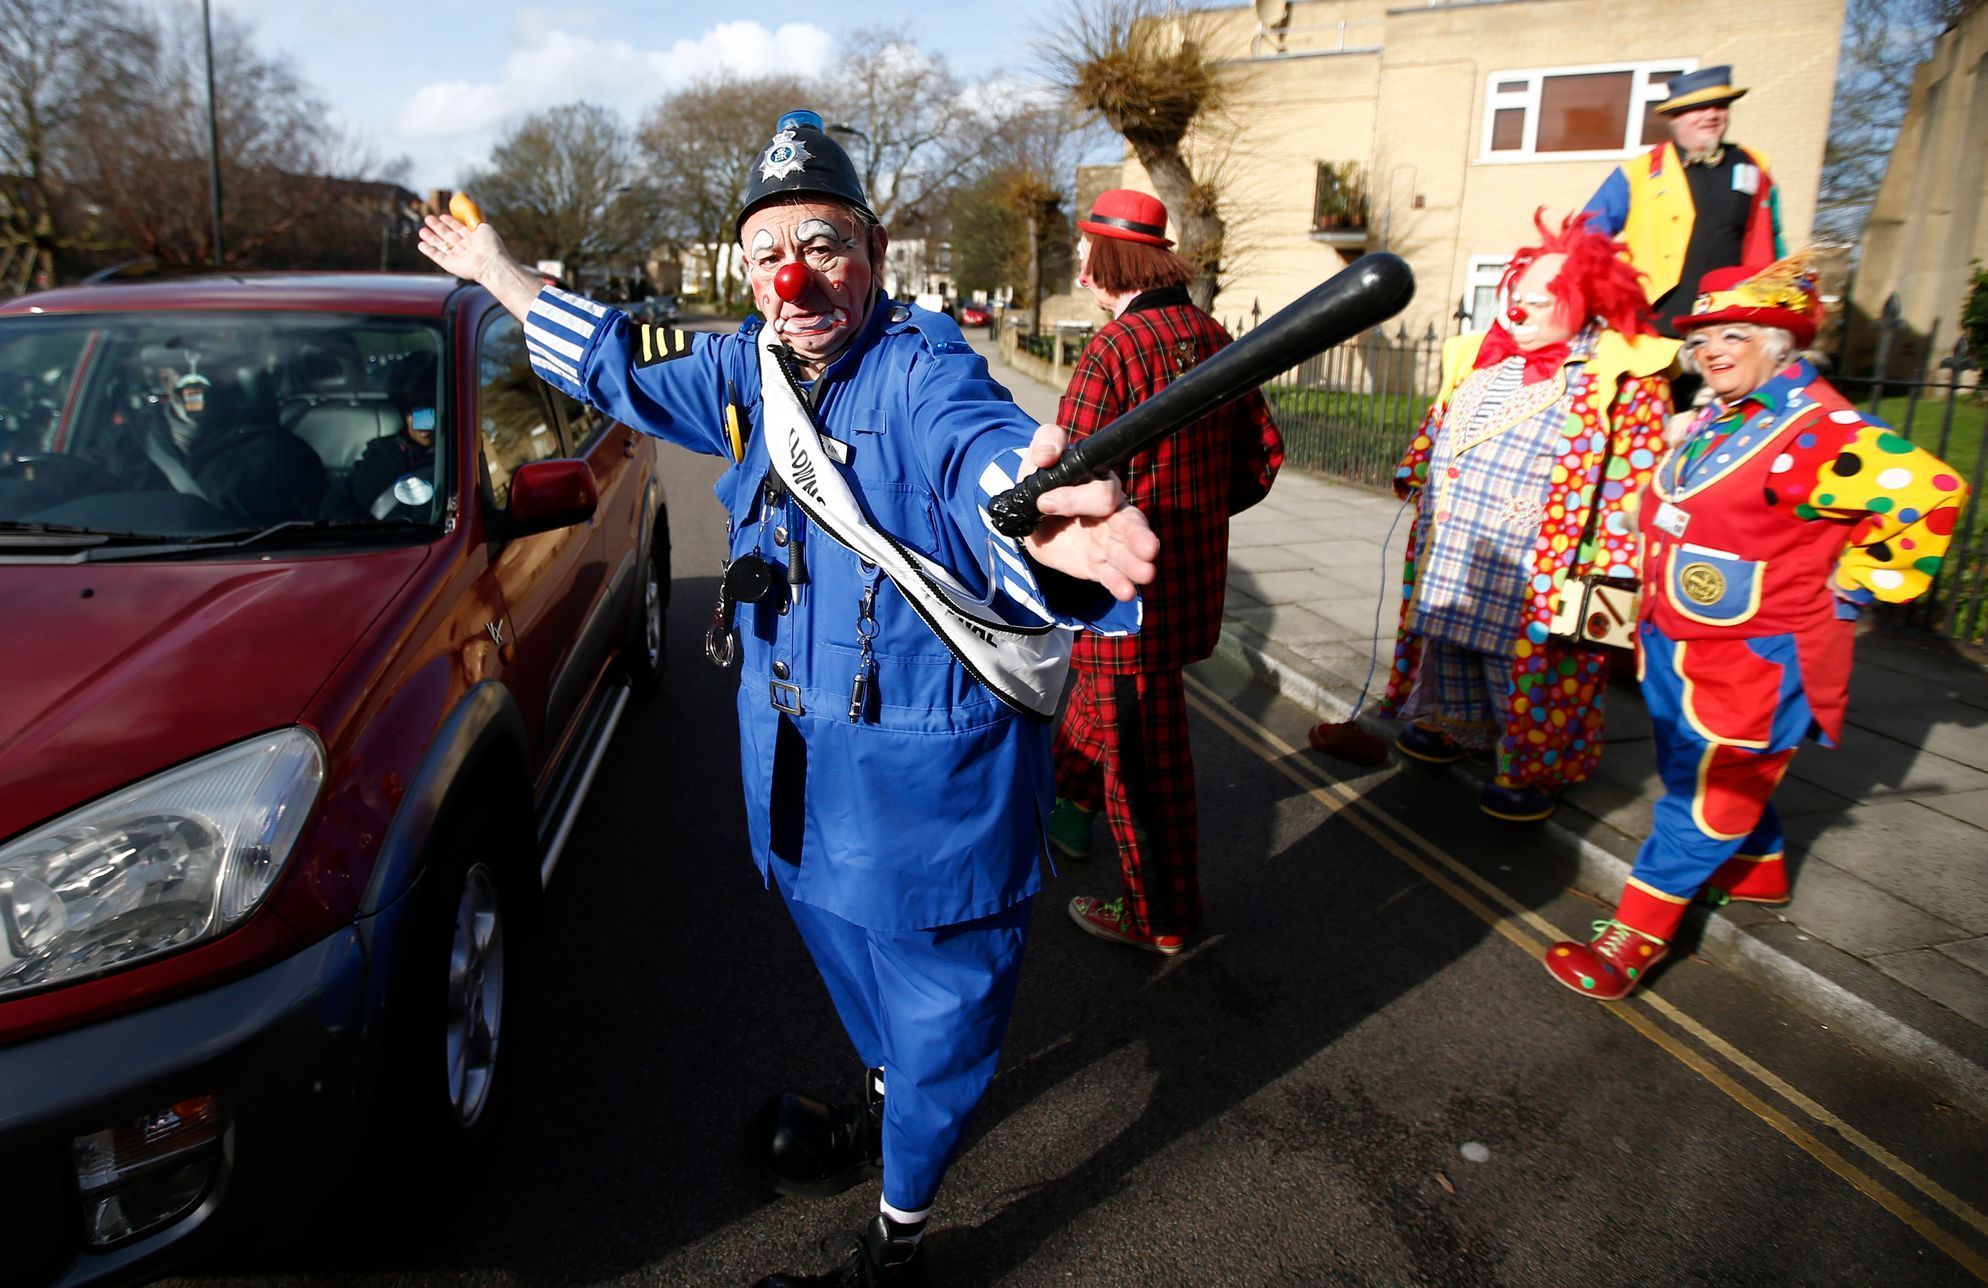 The clown &quot; PC Konk&quot; pretends to direct traffic outside the All Saints Church before the Grimaldi clown service in Dalston, north London